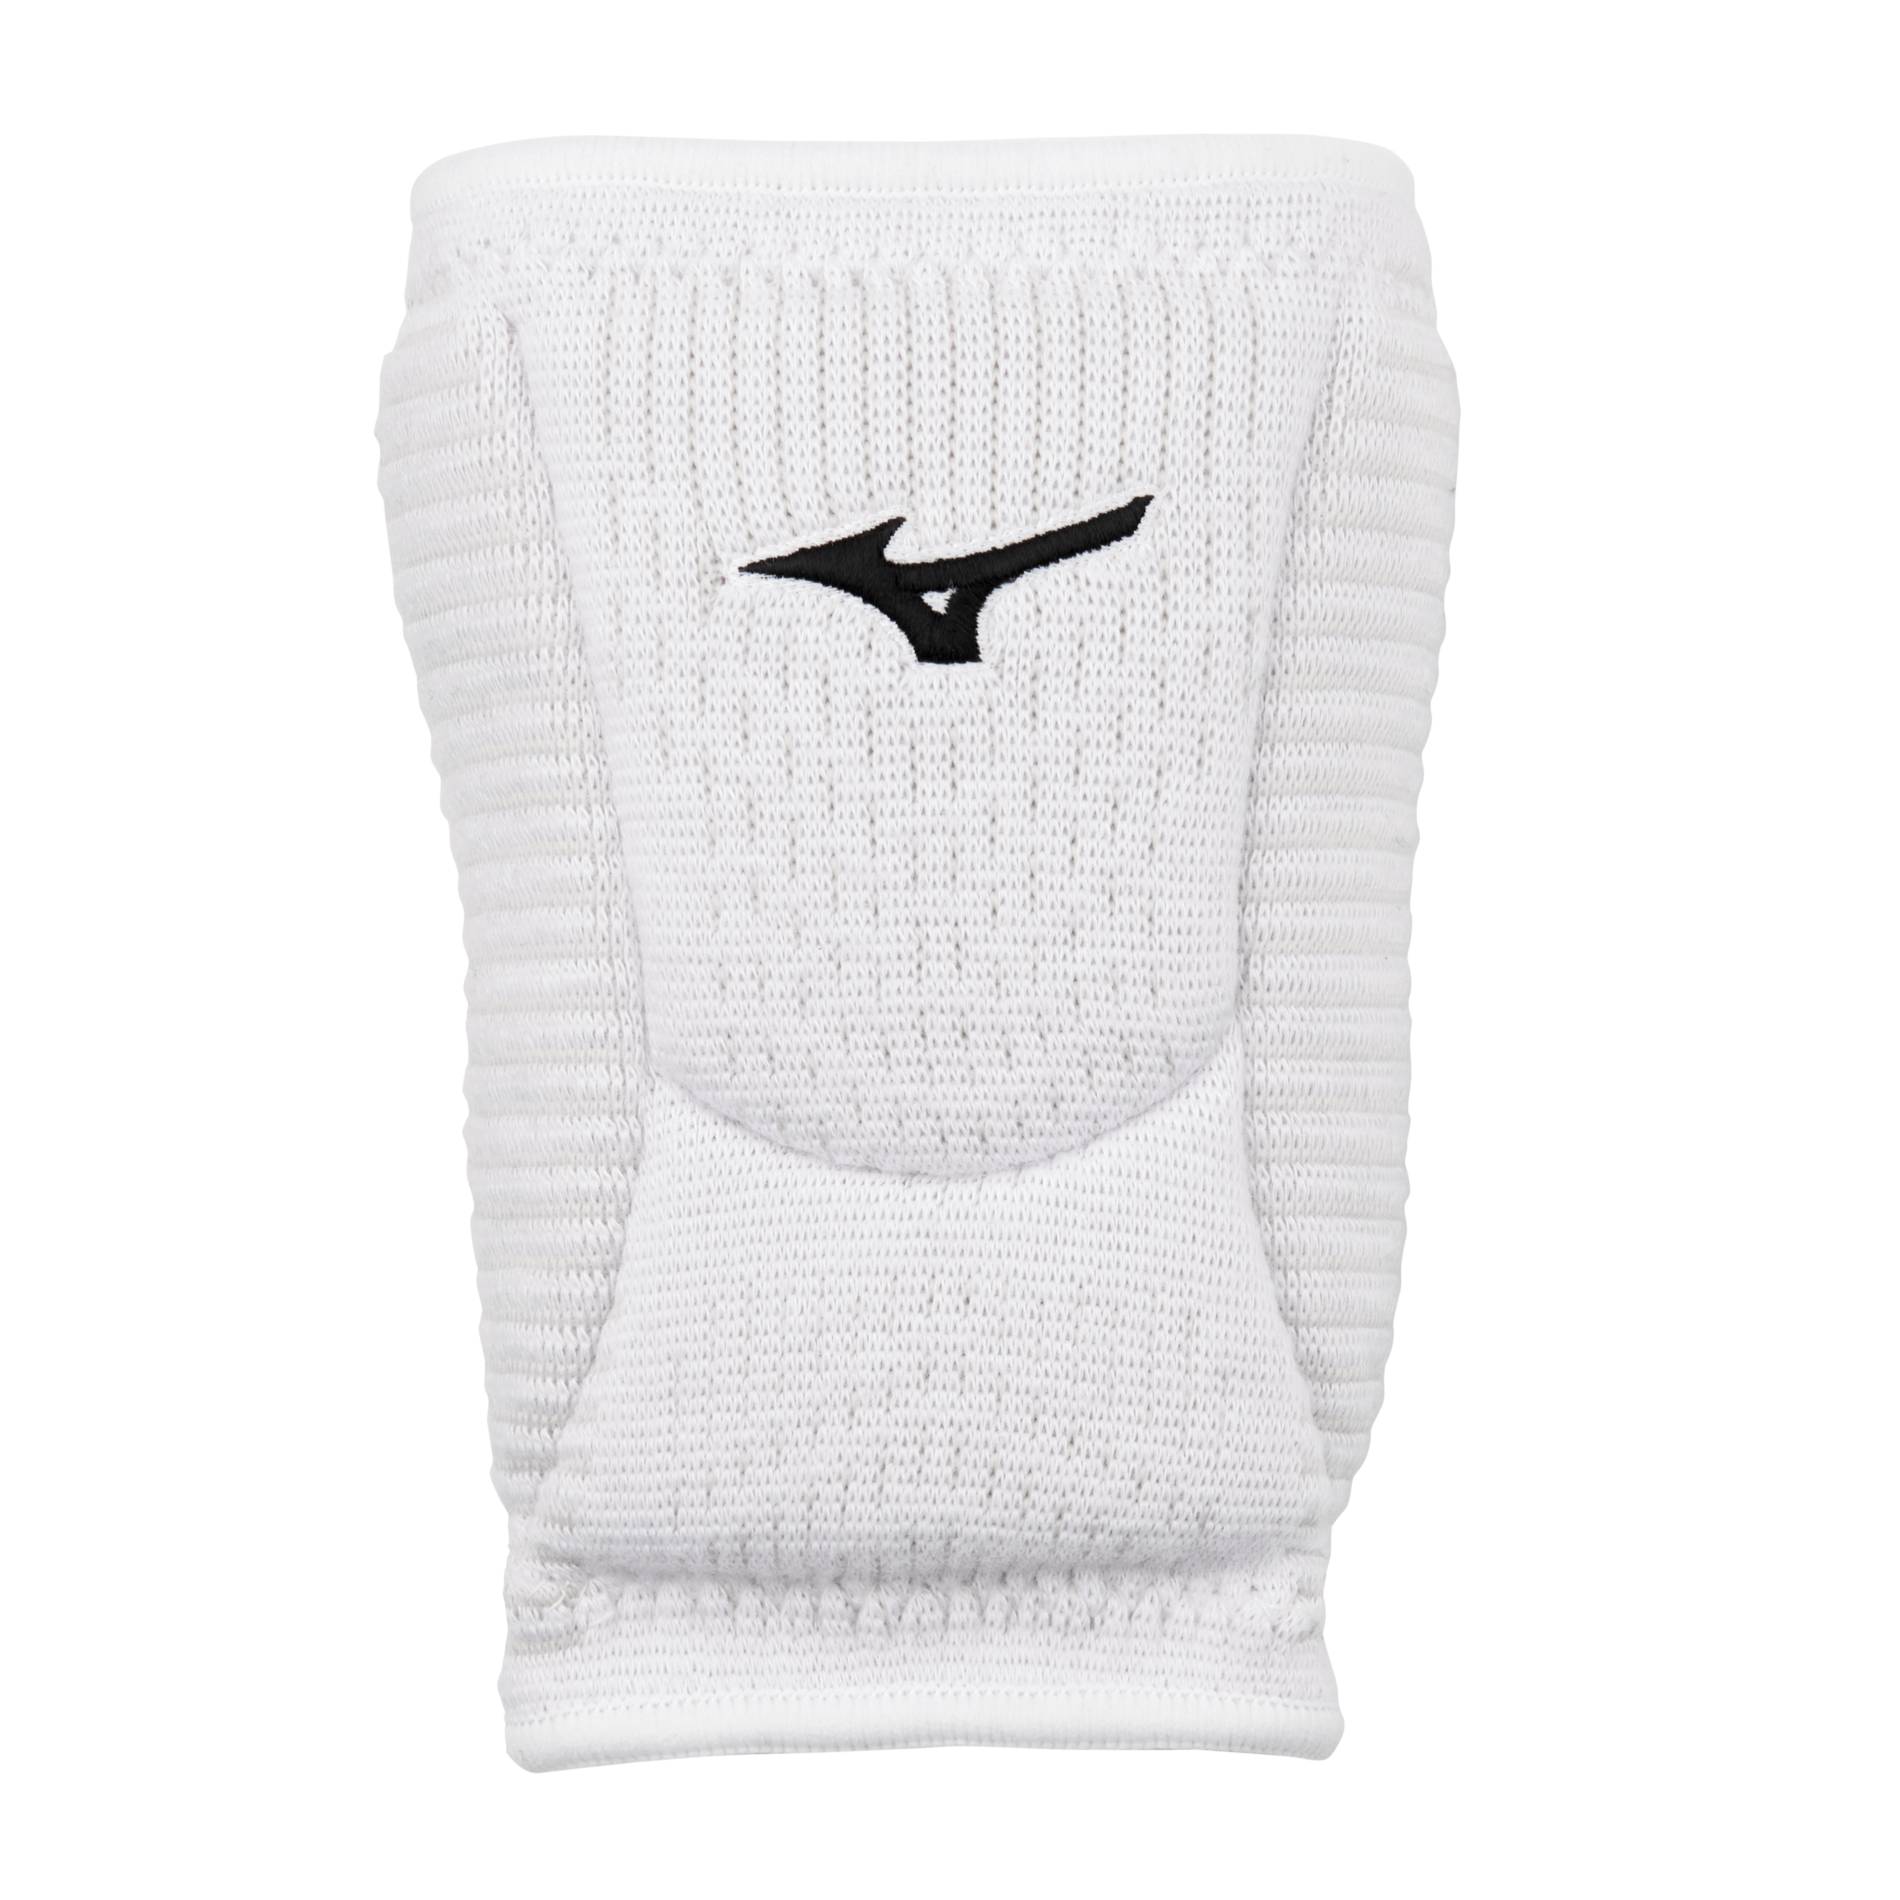 Mizuno] Volleyball Knee Supporter Super Long Pad Black Japan F/S V2MY8020